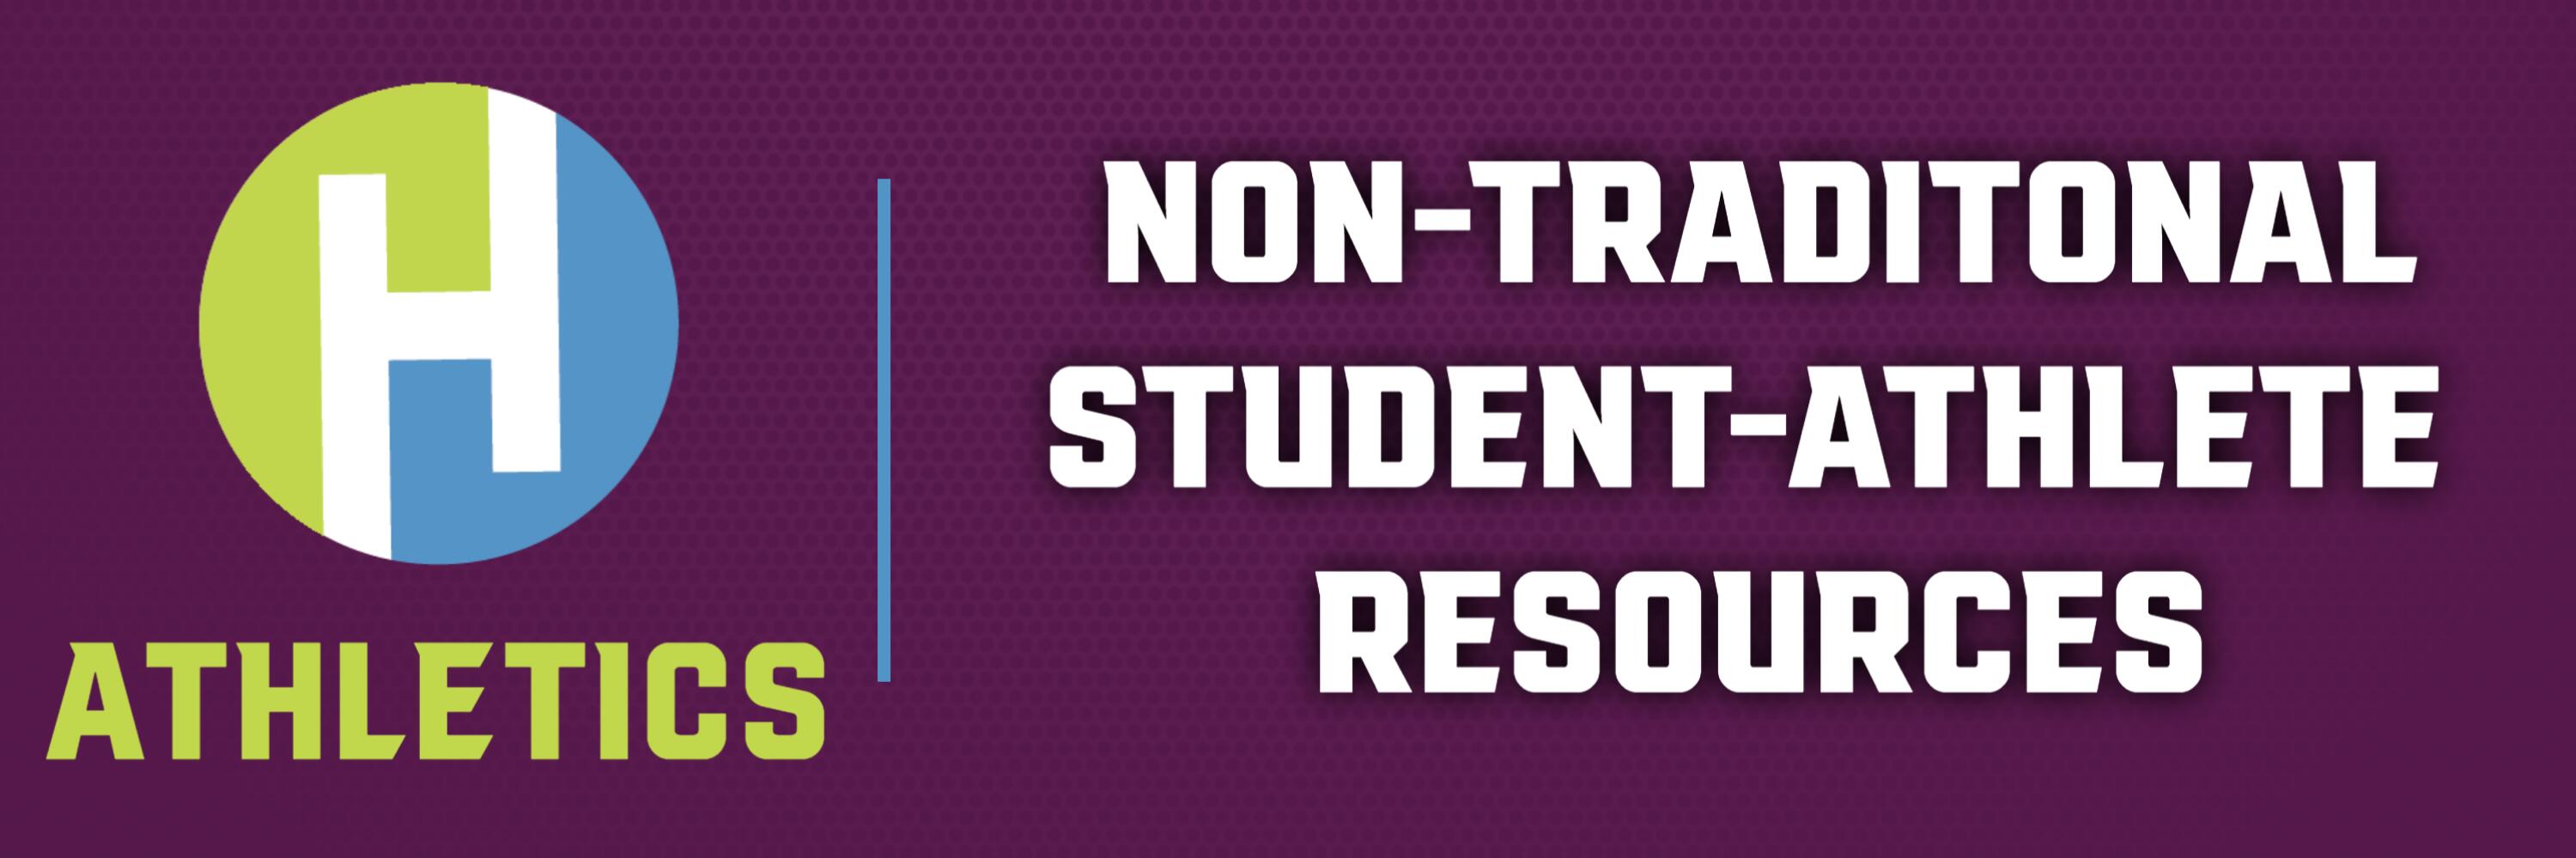 Non-traditional Student-Athlete Resources